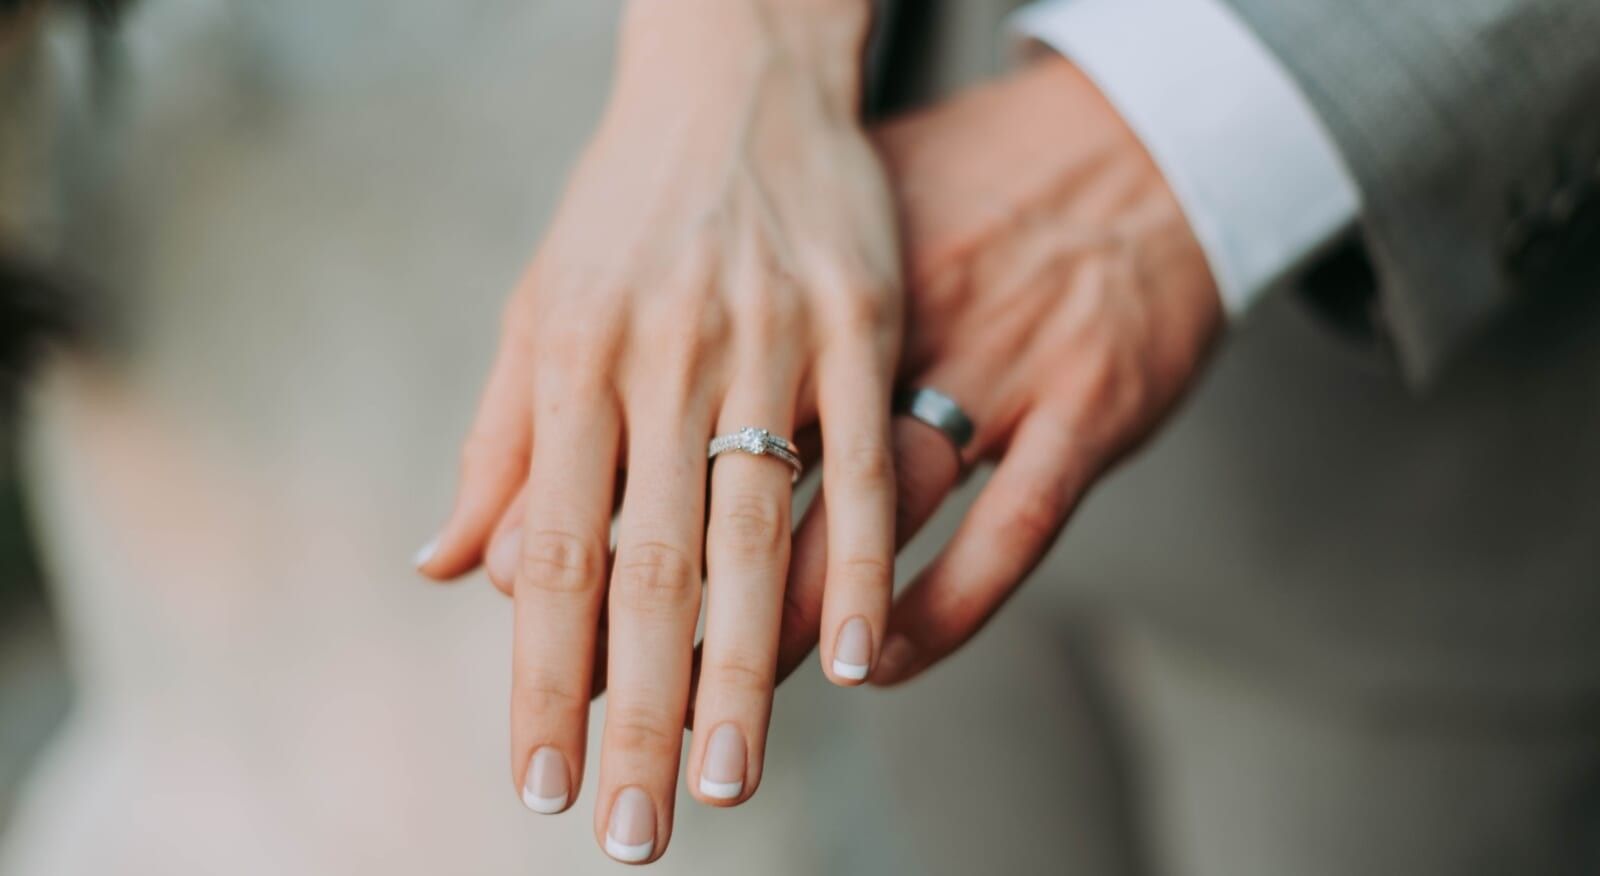 two hands wearing wedding rings hold each other